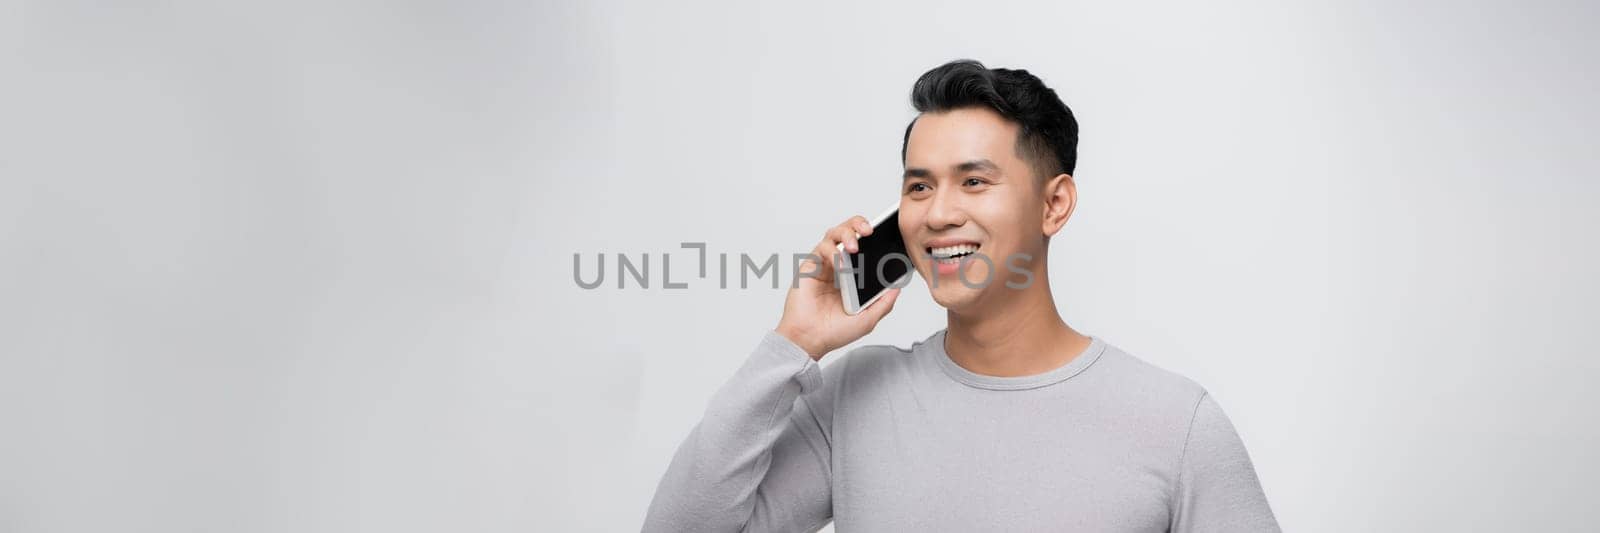 Handsome young man talking on smartphone against grey background.